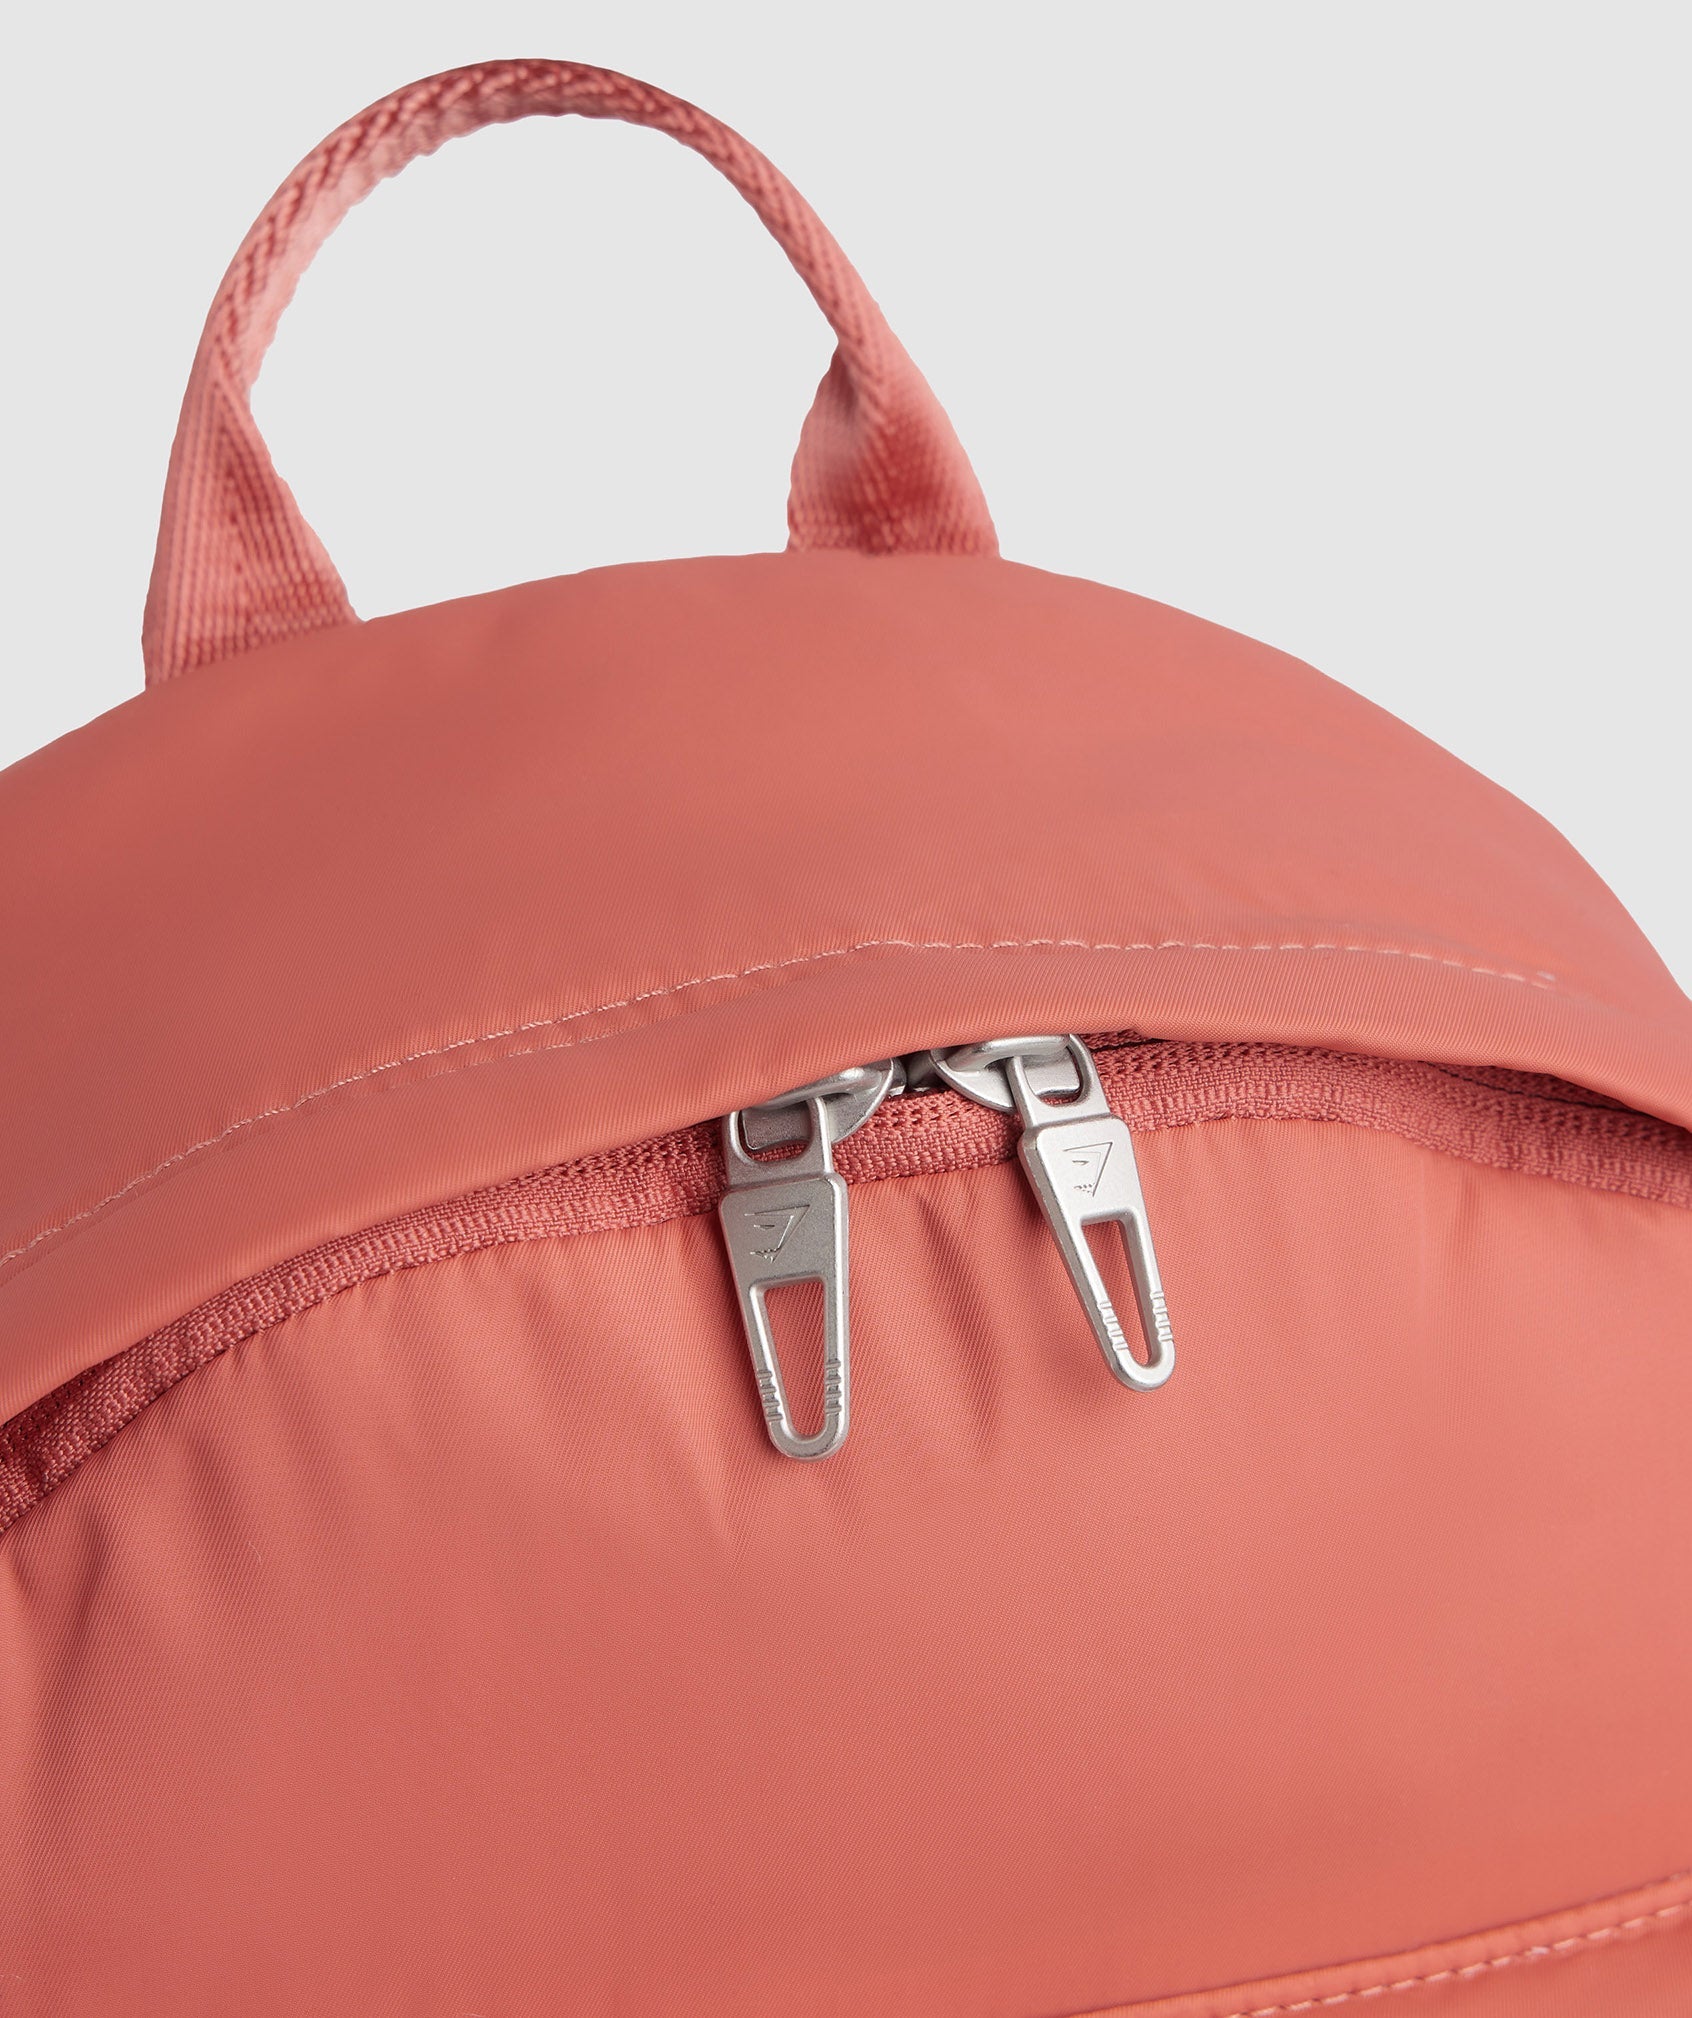 Premium Lifestyle Backpack in Terracotta Pink - view 5